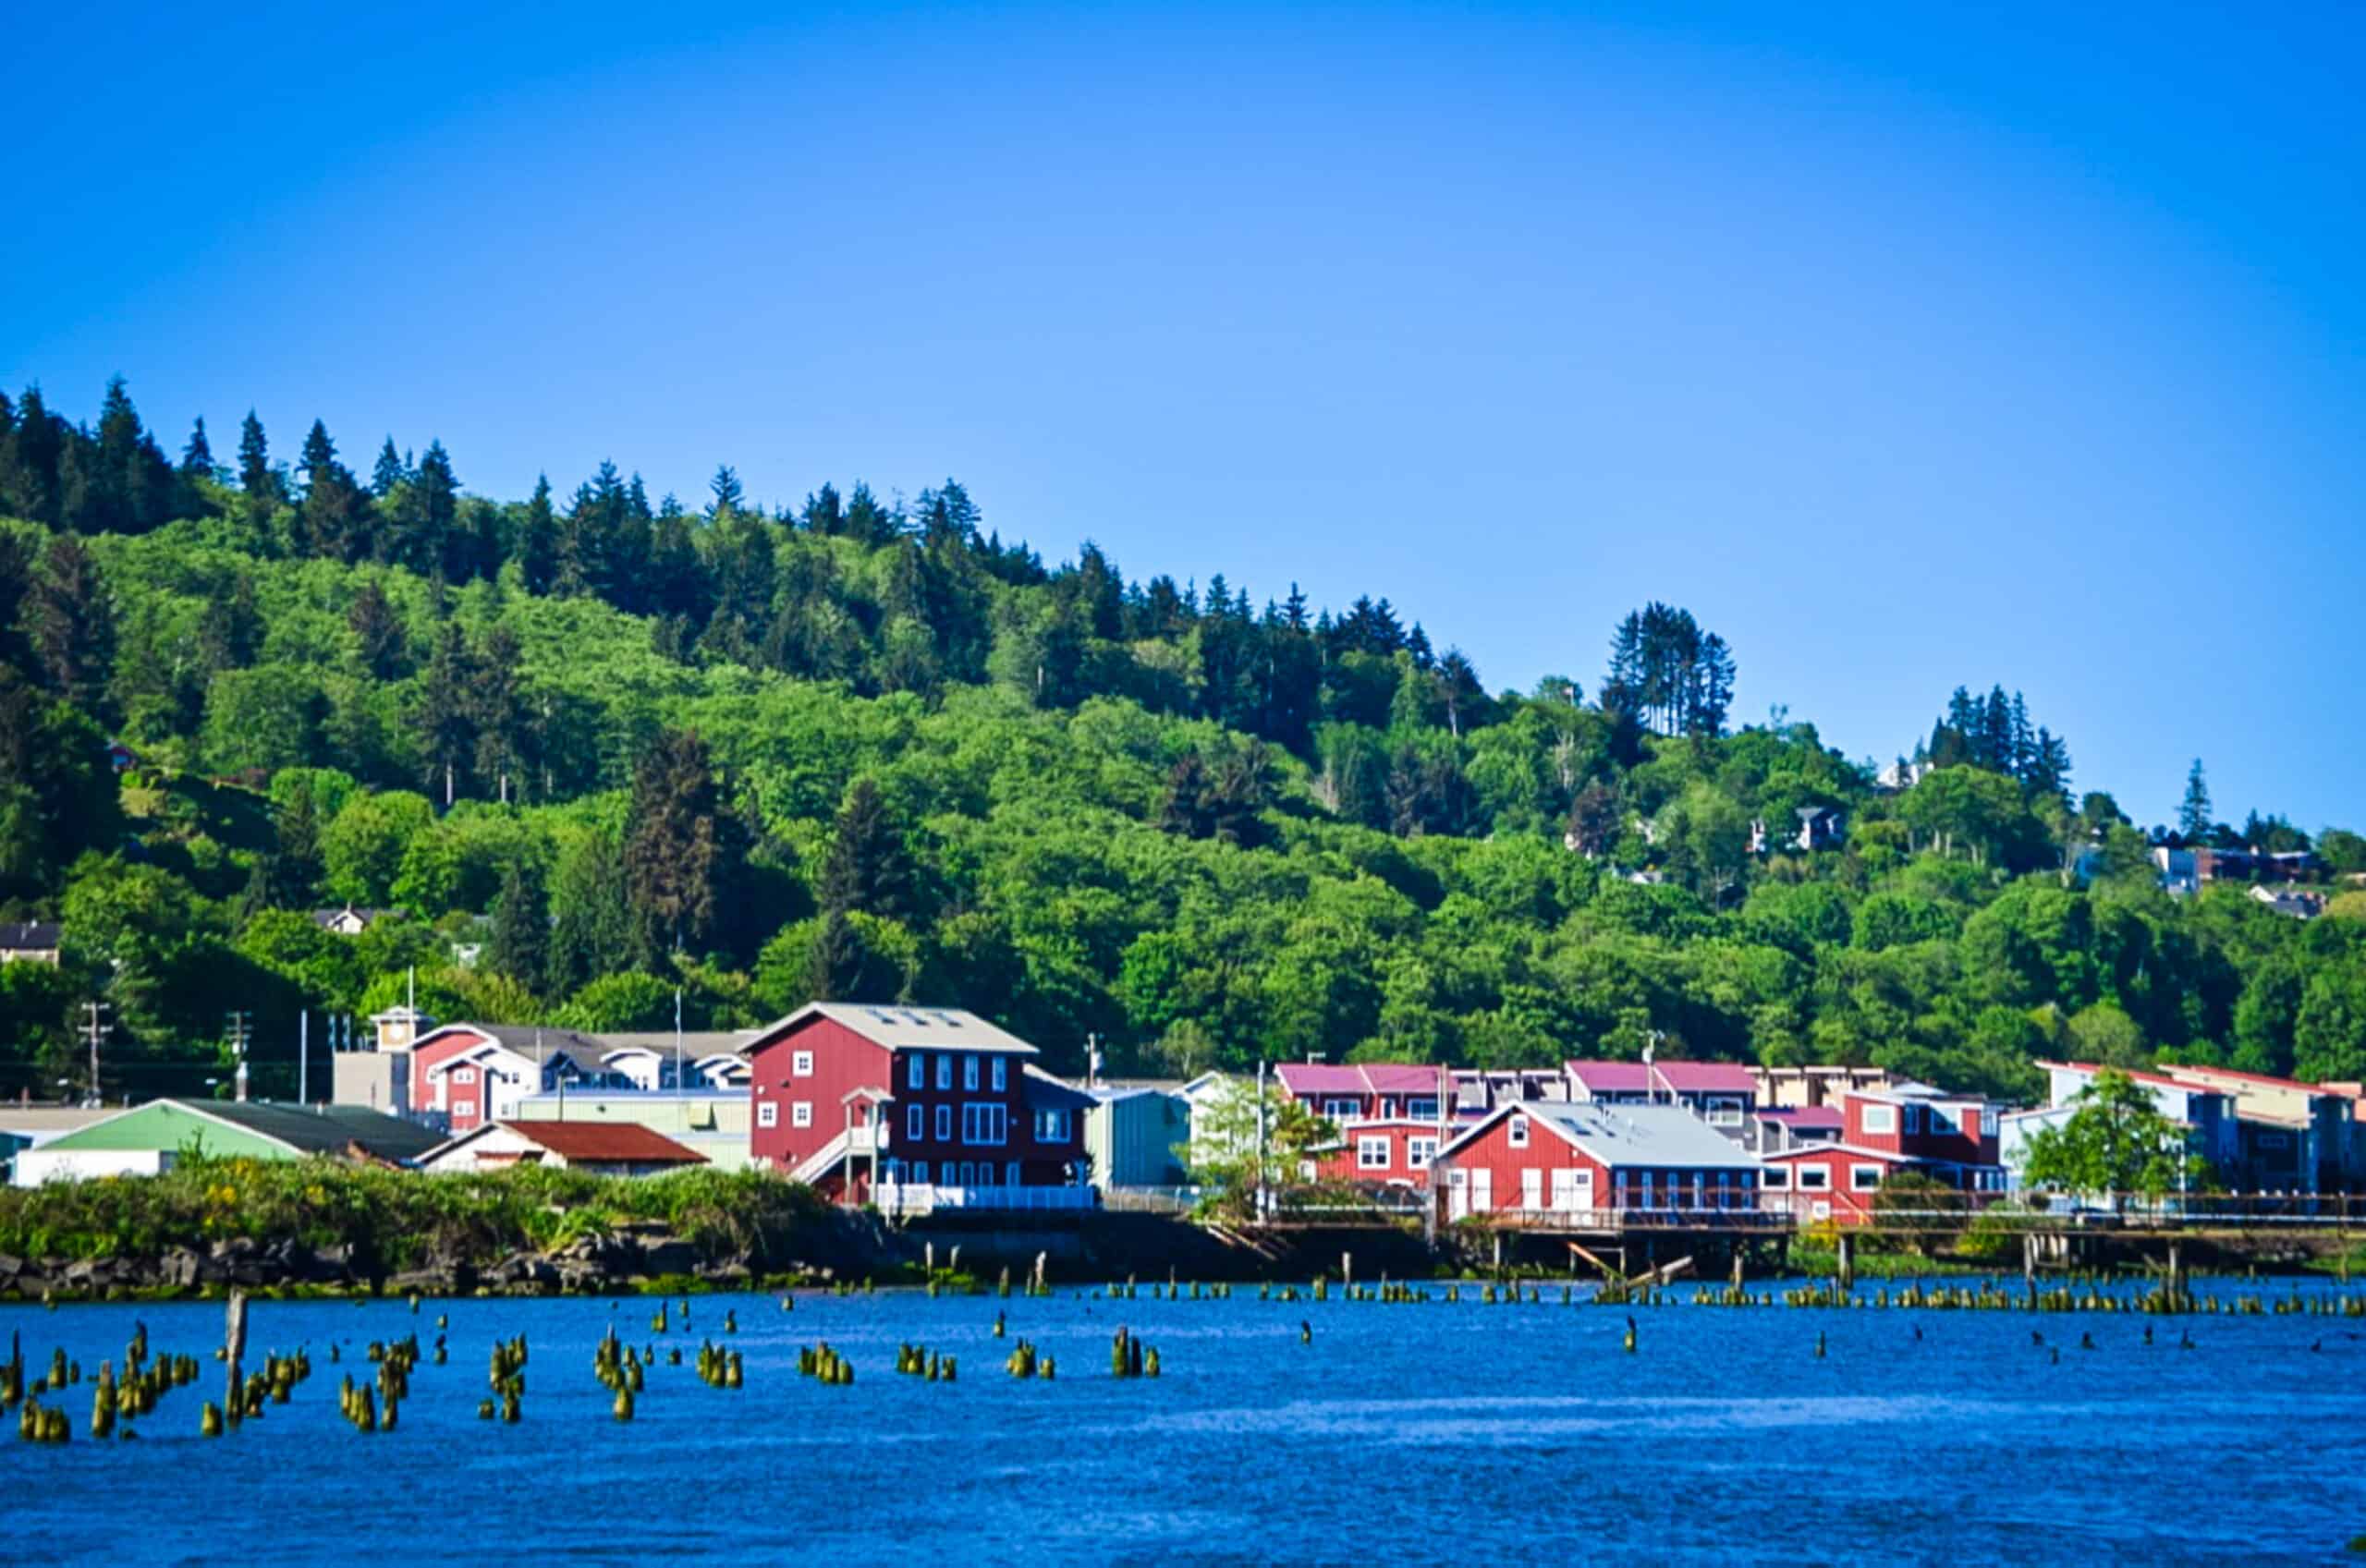 <p>The coastal town tucked away in the Northwestern corner of Oregon is Astoria. The picturesque coastal city is the oldest city in the state. It’s cute and quaint and has been featured in several films, including <em>The Goonies, Free Willy, Into The Wild</em>, and <em>Kindergarten Cop</em>. The town holds several festivals each year, including The Fisher Poets Gathering, which showcases writers sharing stories related to the fishing industry, and the Dark Arts Festival, which highlights the arts of glassblowing, blacksmithing, and dark beers. This is a great city for creative folks.</p>